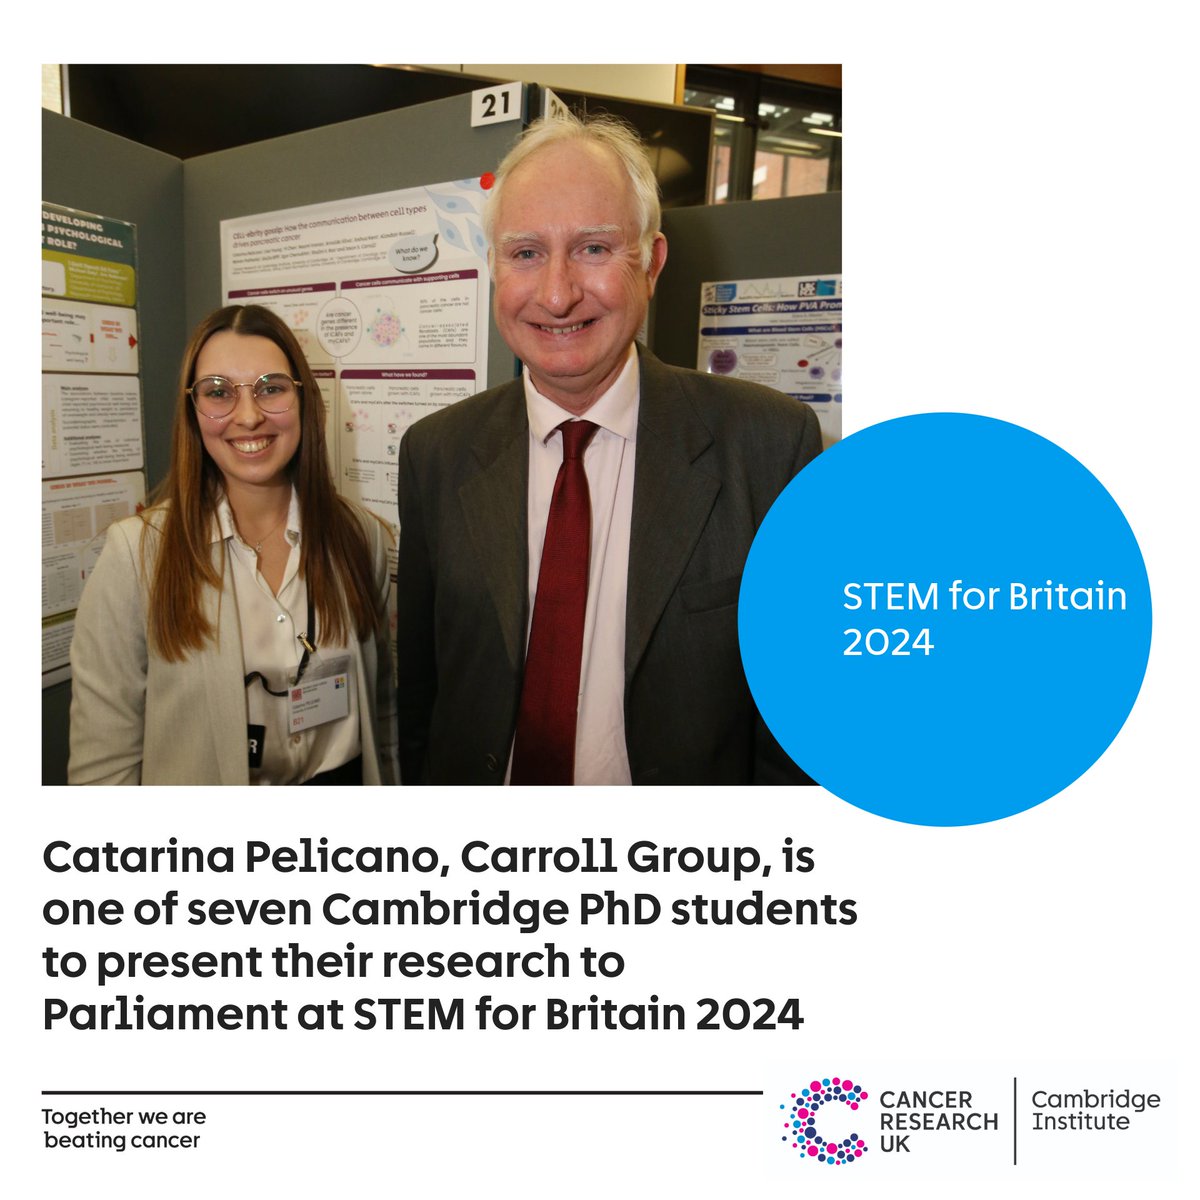 PhD student @itspelicanoc was among early career researchers who presented their work to Parliament at @STEM4Brit '24. The event enabled her to speak to MPs, including @DanielZeichner, about her research, which seeks to identify future therapies for pancreatic cancer.